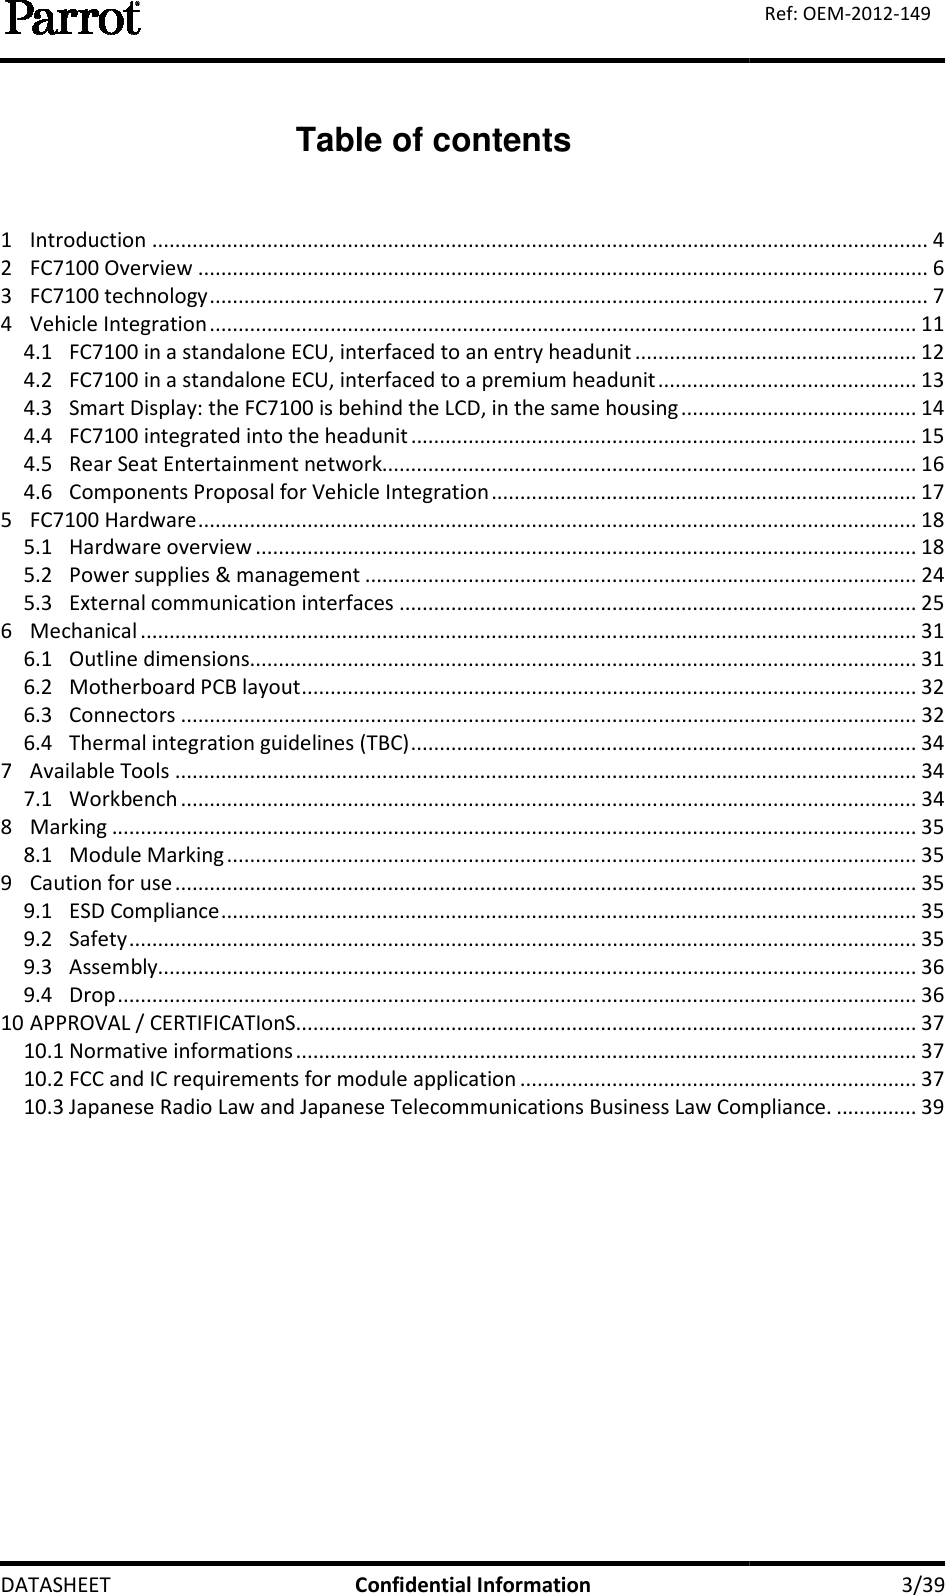  DATASHEET          Table of contents  1  Introduction ................................2  FC7100 Overview ................................3  FC7100 technology ................................4  Vehicle Integration ................................4.1 FC7100 in a standalone ECU, interfaced to an entry headunit4.2 FC7100 in a standalone ECU, interfaced to a premium headunit4.3 Smart Display: the FC7100 is behind the LCD, in the same housing4.4 FC7100 integrated into the headunit4.5  Rear Seat Entertainment network4.6 Components Proposal for Vehicle Integration5  FC7100 Hardware ................................5.1  Hardware overview ................................5.2 Power supplies &amp; management5.3 External communication interfaces6  Mechanical ................................6.1  Outline dimensions................................6.2  Motherboard PCB layout 6.3  Connectors ................................6.4 Thermal integration guidelines (TBC)7  Available Tools ................................7.1  Workbench ................................8  Marking ................................................................8.1  Module Marking ................................9  Caution for use ................................9.1  ESD Compliance ................................9.2  Safety ................................9.3  Assembly................................9.4  Drop ................................10 APPROVAL / CERTIFICATIonS................................10.1 Normative informations ................................10.2 FCC and IC requirements for module application10.3 Japanese Radio Law and Japanese Telecommunications Business Law Compliance.   Confidential Information  Table of contents ................................................................................................................................................................................................................................................................................................................................................................................................................................FC7100 in a standalone ECU, interfaced to an entry headunit ................................FC7100 in a standalone ECU, interfaced to a premium headunit ................................Smart Display: the FC7100 is behind the LCD, in the same housing ................................FC7100 integrated into the headunit ................................................................Entertainment network................................................................Components Proposal for Vehicle Integration ................................................................................................................................................................................................................................................................Power supplies &amp; management ................................................................................................External communication interfaces ................................................................................................................................................................................................................................................................................................ ................................................................................................................................................................................................................................Thermal integration guidelines (TBC) ................................................................................................................................................................................................................................................................................................................................................................................................................................................................................................................................................................................................................................................................................................................................................................................................................................................................................................................................................................................................................................................................................................................................................................................................................................................................................................................................................................FCC and IC requirements for module application ................................................................Japanese Radio Law and Japanese Telecommunications Business Law Compliance.   3/39 Ref: OEM-2012-149 ....................................... 4 ............................................................... 6 ............................................................. 7 ........................................................... 11 ................................................. 12 ............................................. 13 ......................................... 14 ........................................................ 15 ............................................................. 16 .......................................... 17 ............................................................. 18 ................................................... 18 ................................ 24 .......................................................... 25 ....................................... 31 .................................................... 31 ........................................... 32 ................................ 32 ........................................................ 34 ................................. 34 ................................ 34 ............................................ 35 ........................................................ 35 ................................. 35 ......................................................... 35 ......................................... 35 .................................... 36 ........................................... 36 ............................................ 37 ............................................ 37 ..................................... 37 Japanese Radio Law and Japanese Telecommunications Business Law Compliance. .............. 39 